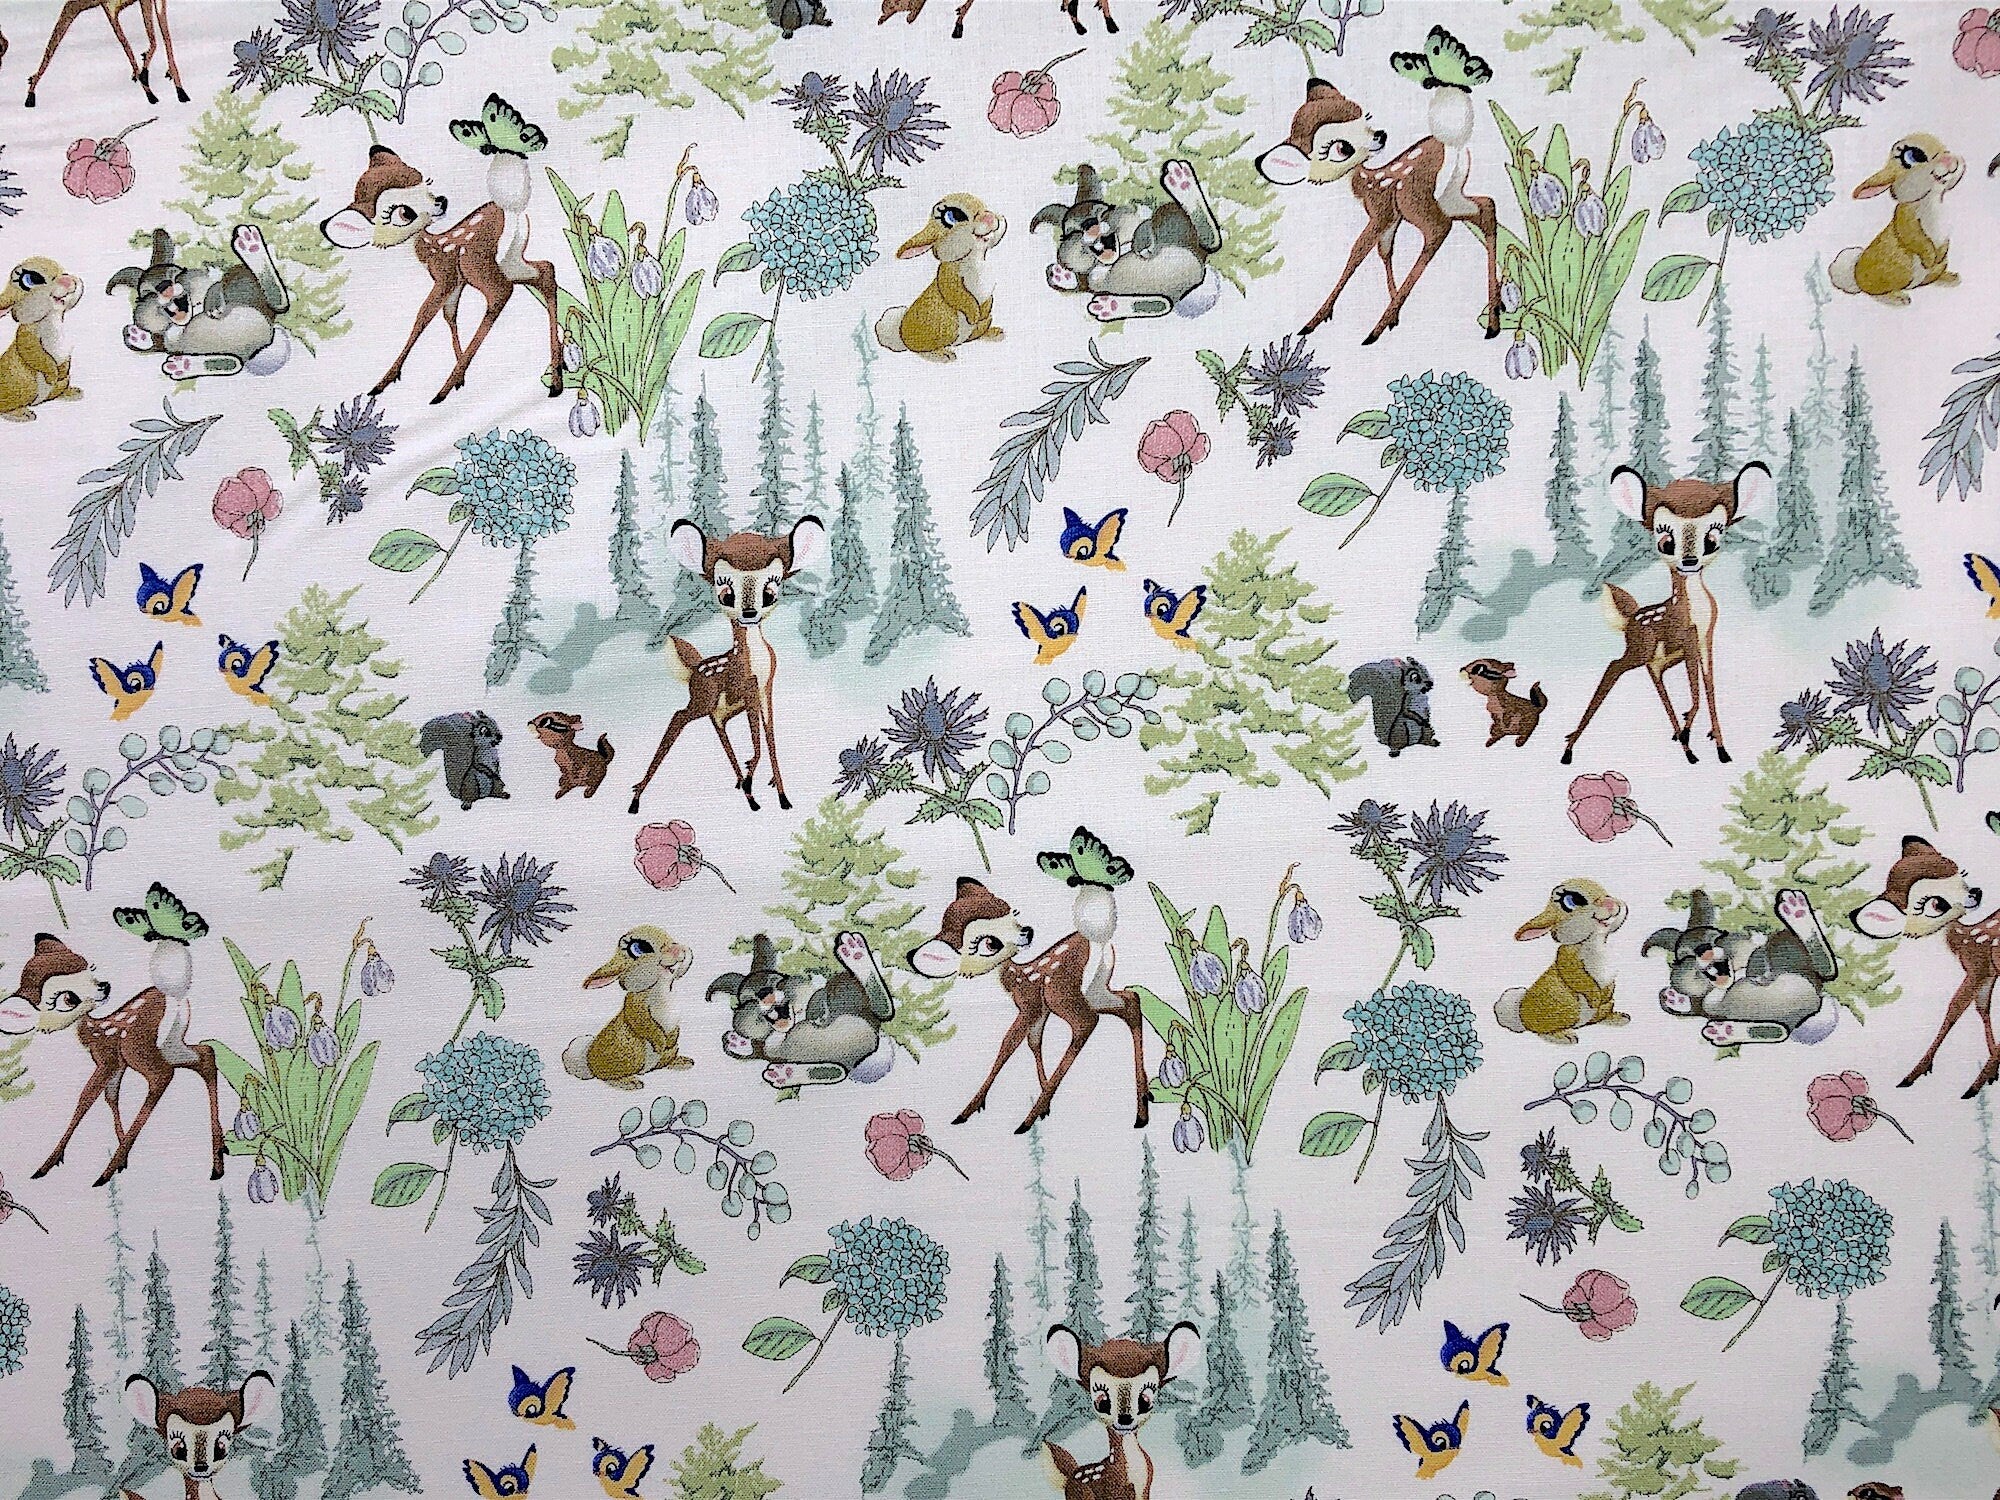 This fabric is called Bambi and Friends. The white fabric is covered with deer, birds, squirrels, flowers and leaves.